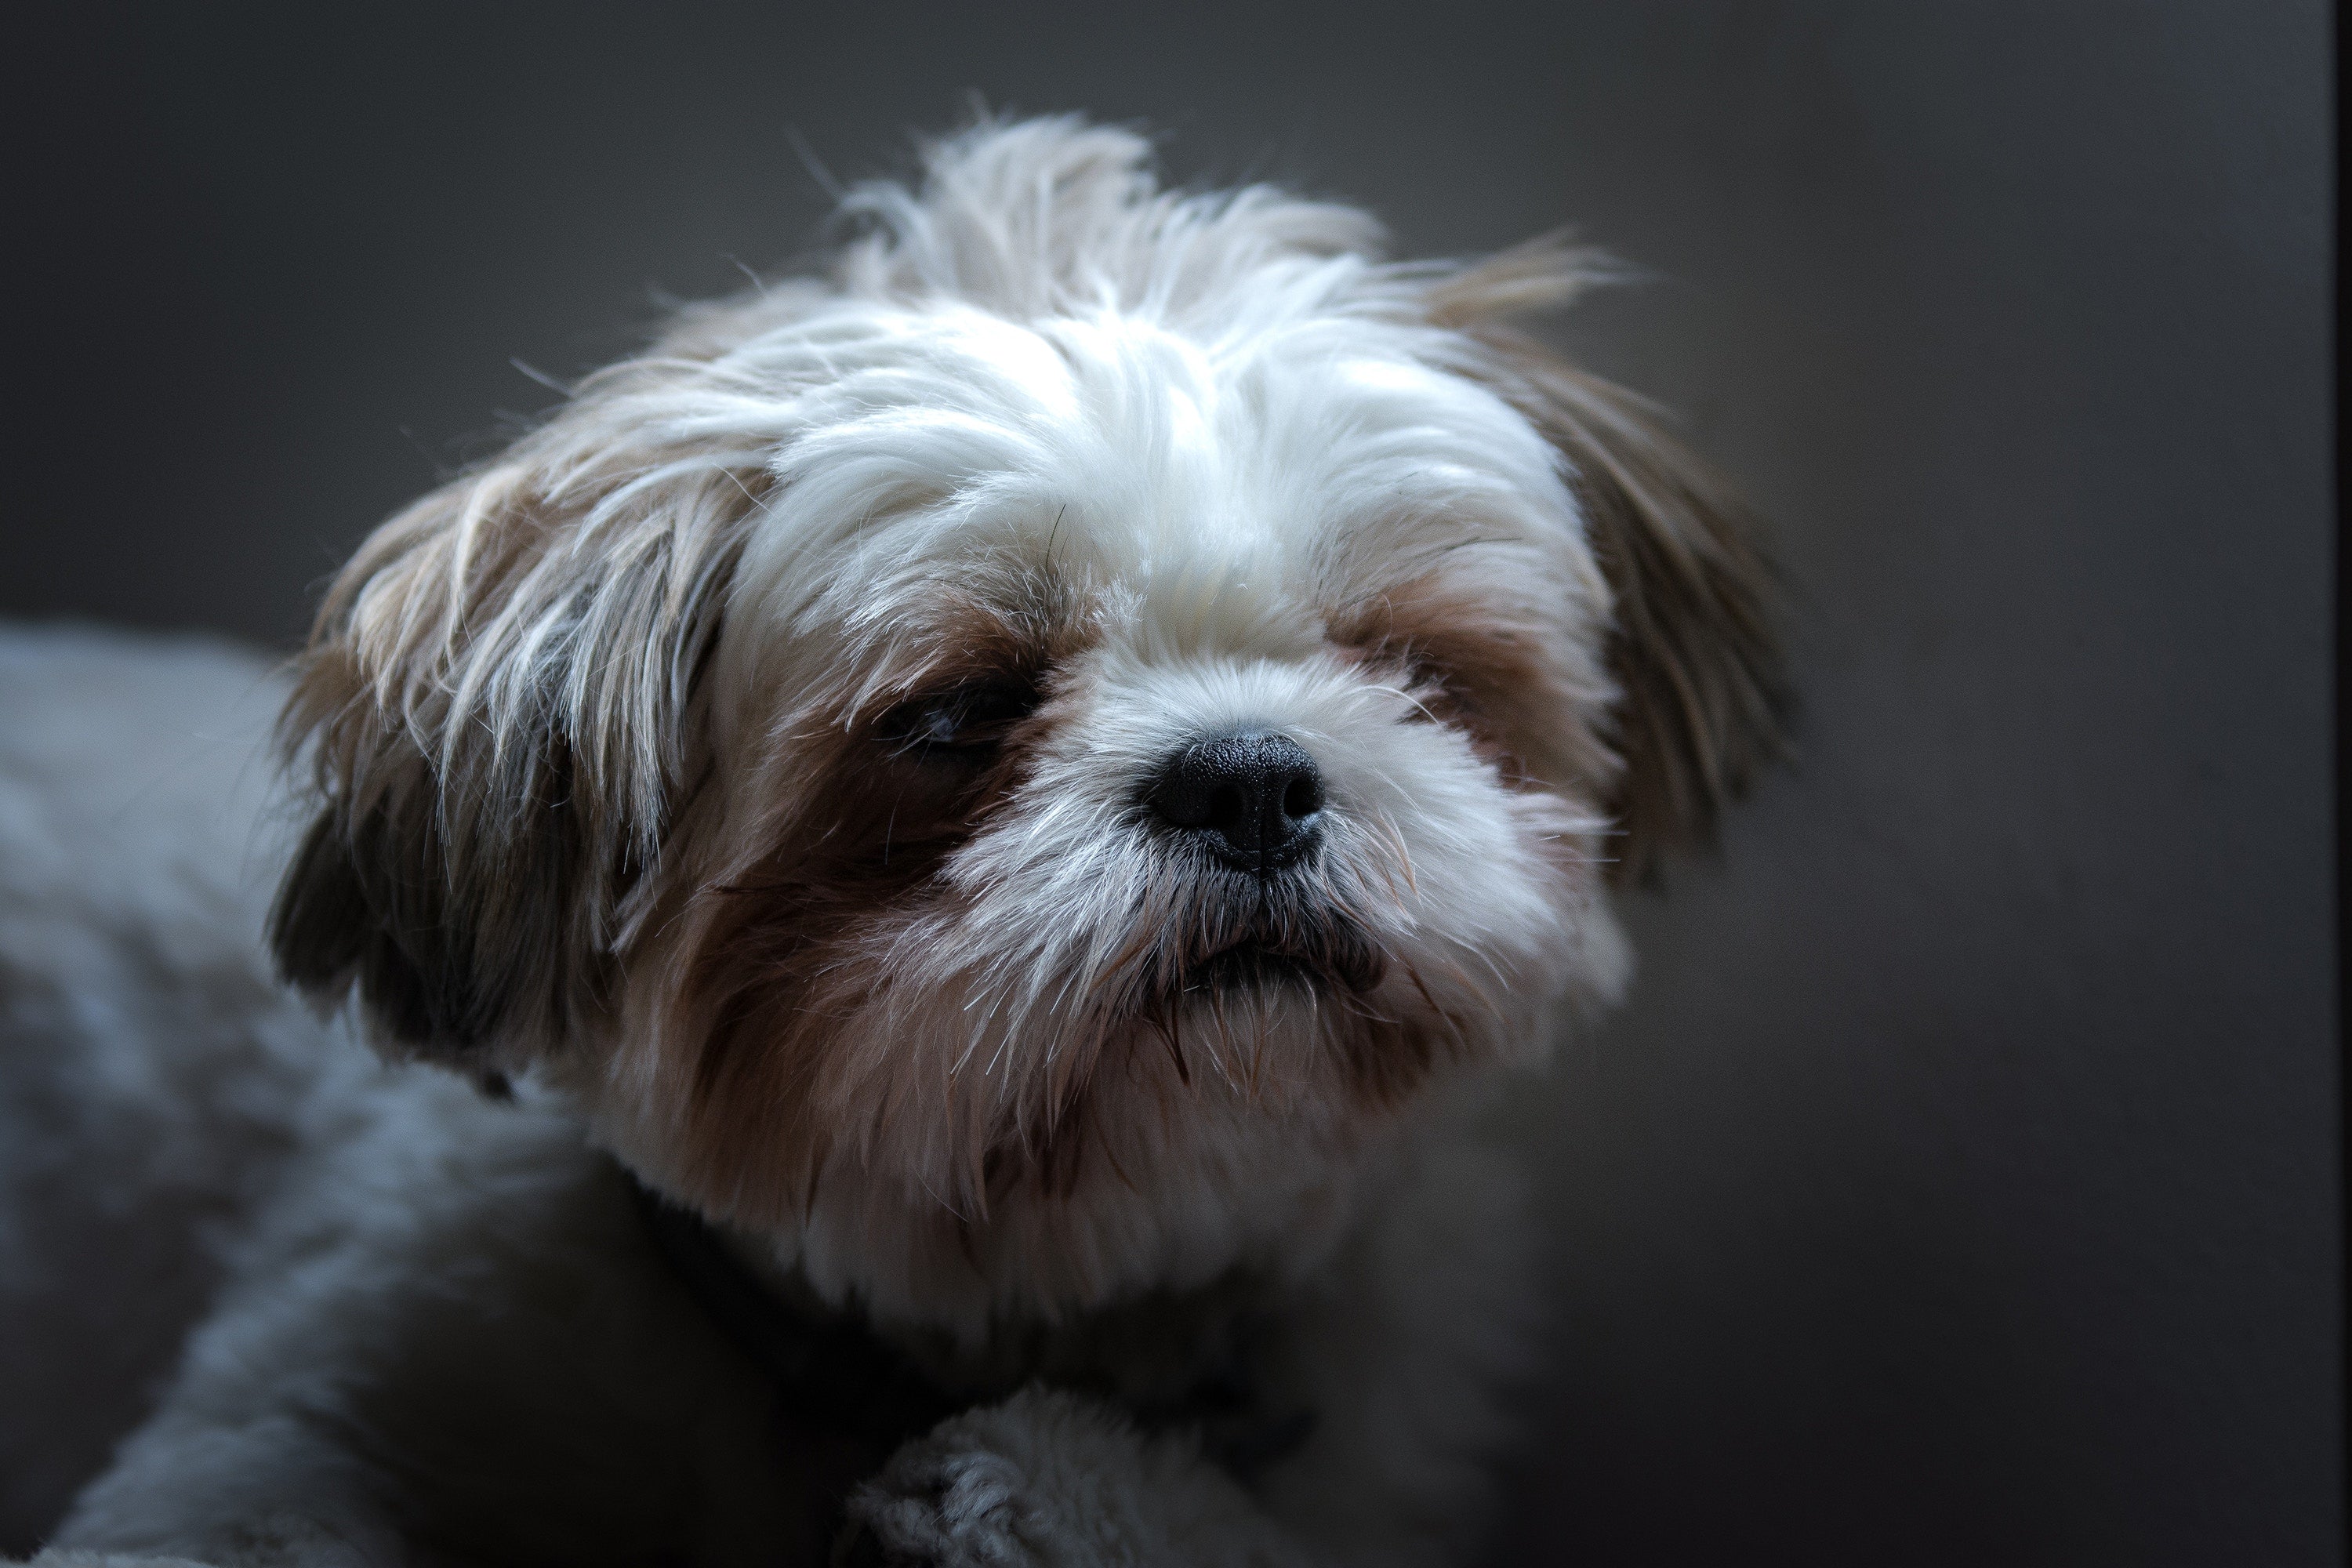 what are the best leashes for shih tzu puppies